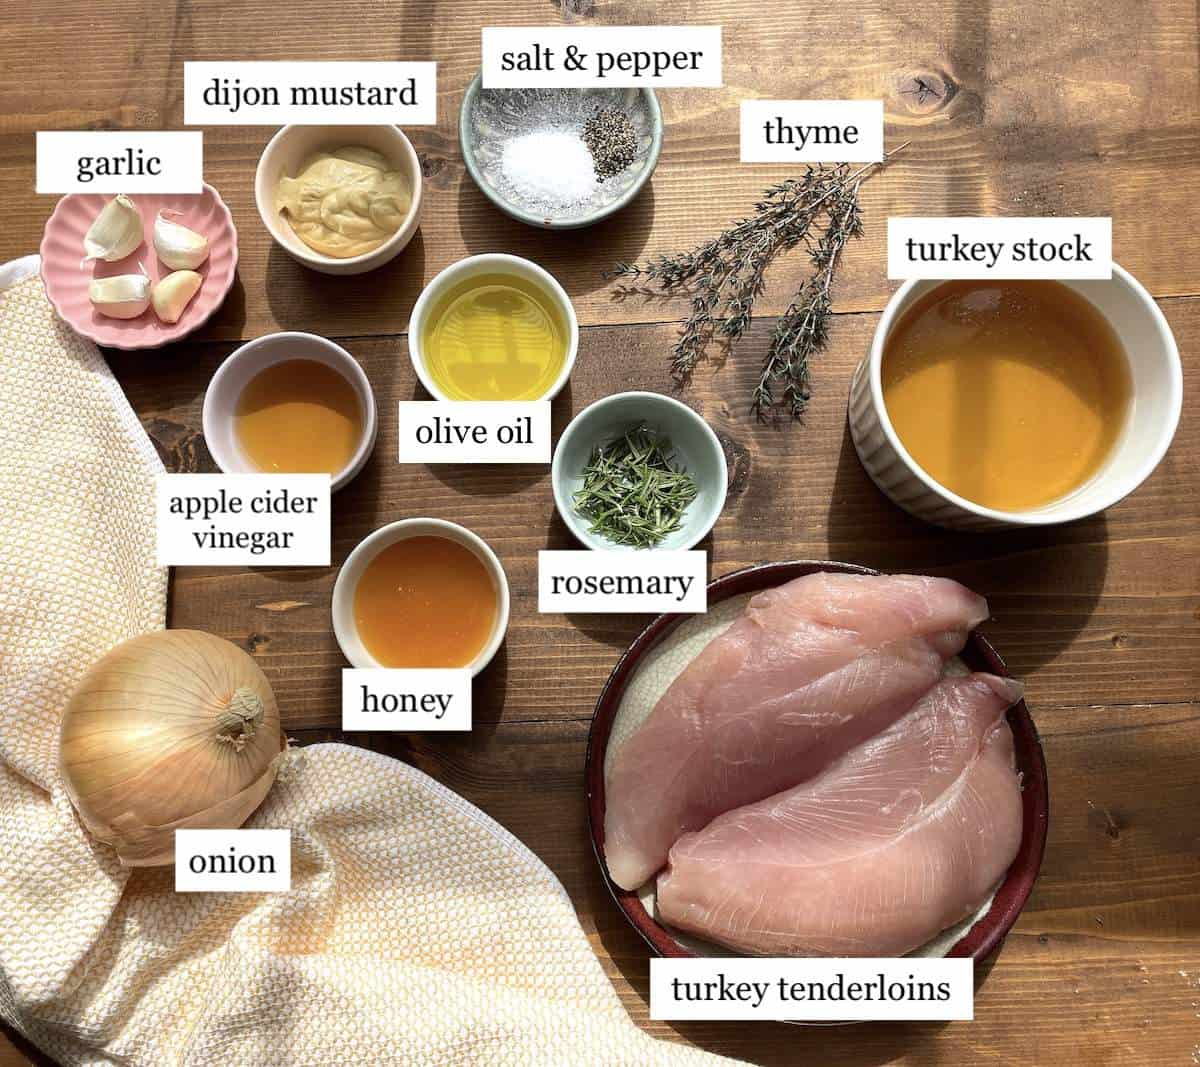 The ingredients needed to make crockpot turkey tenderloins, laid out and labeled.